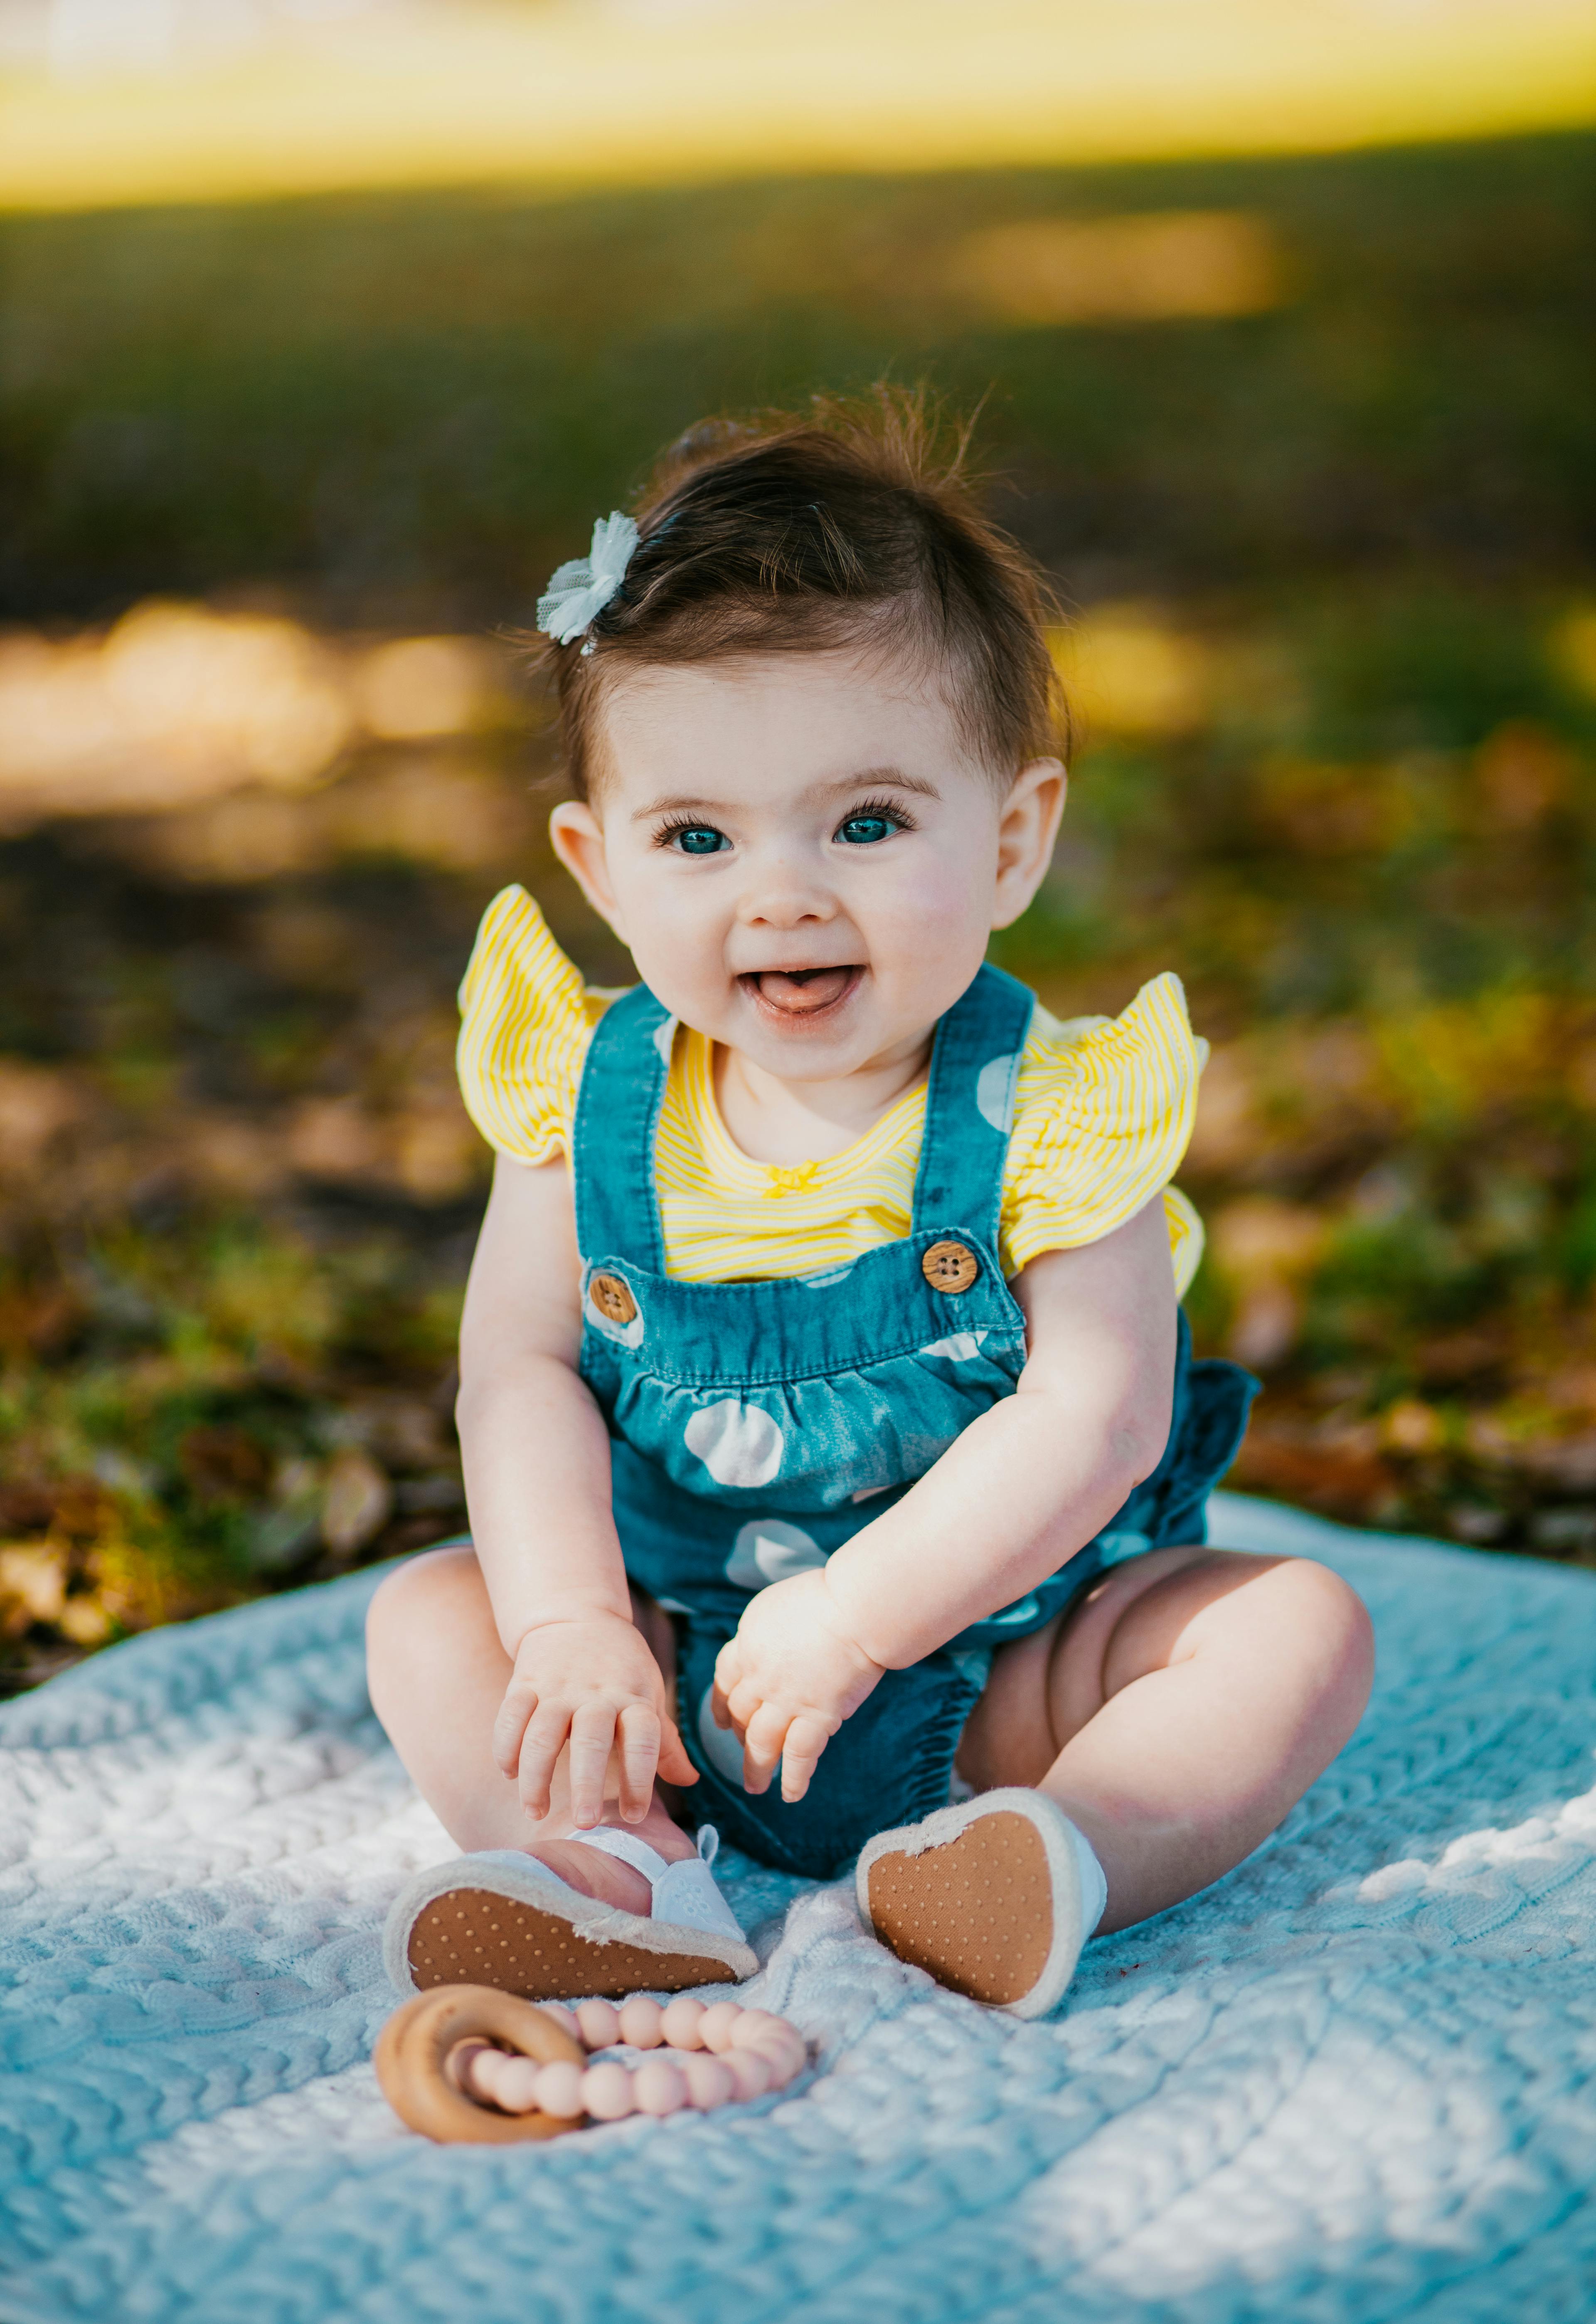 A cheerful baby sitting on a blue blanket on the grass with a bow in her hair